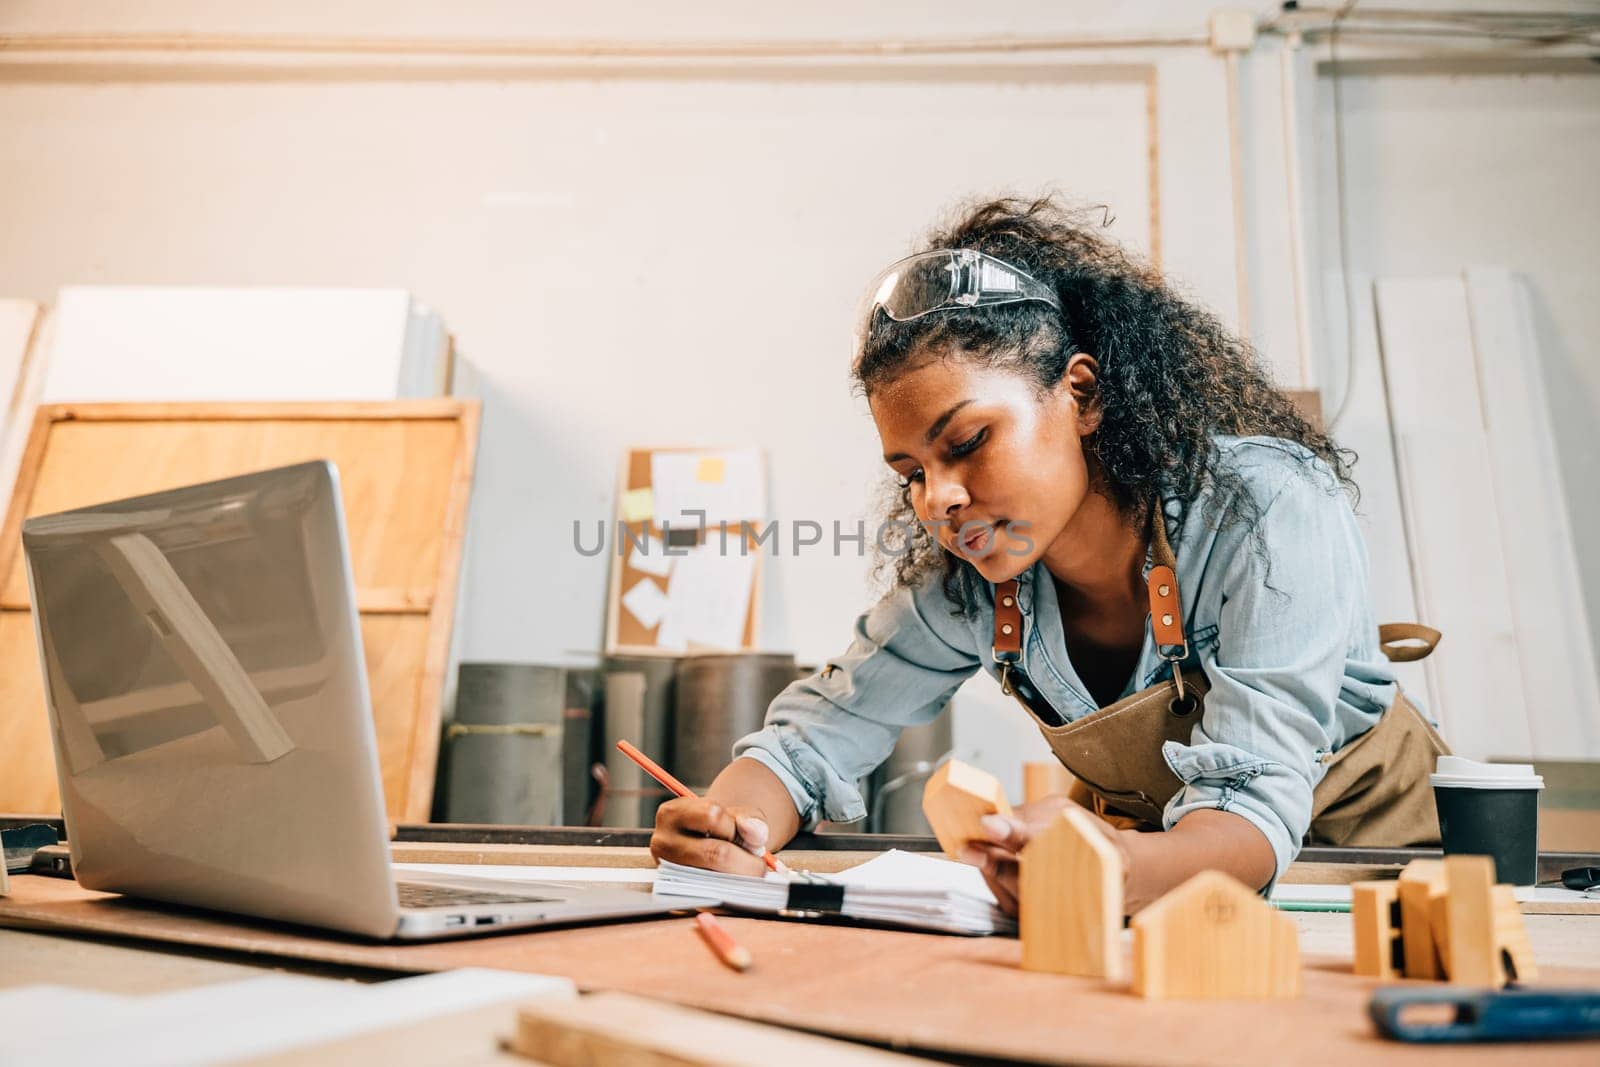 Carpenter america black woman curly hair drawings on paper work with laptop, young female working sketch job and learning online at woodshop, National Carpenters Day